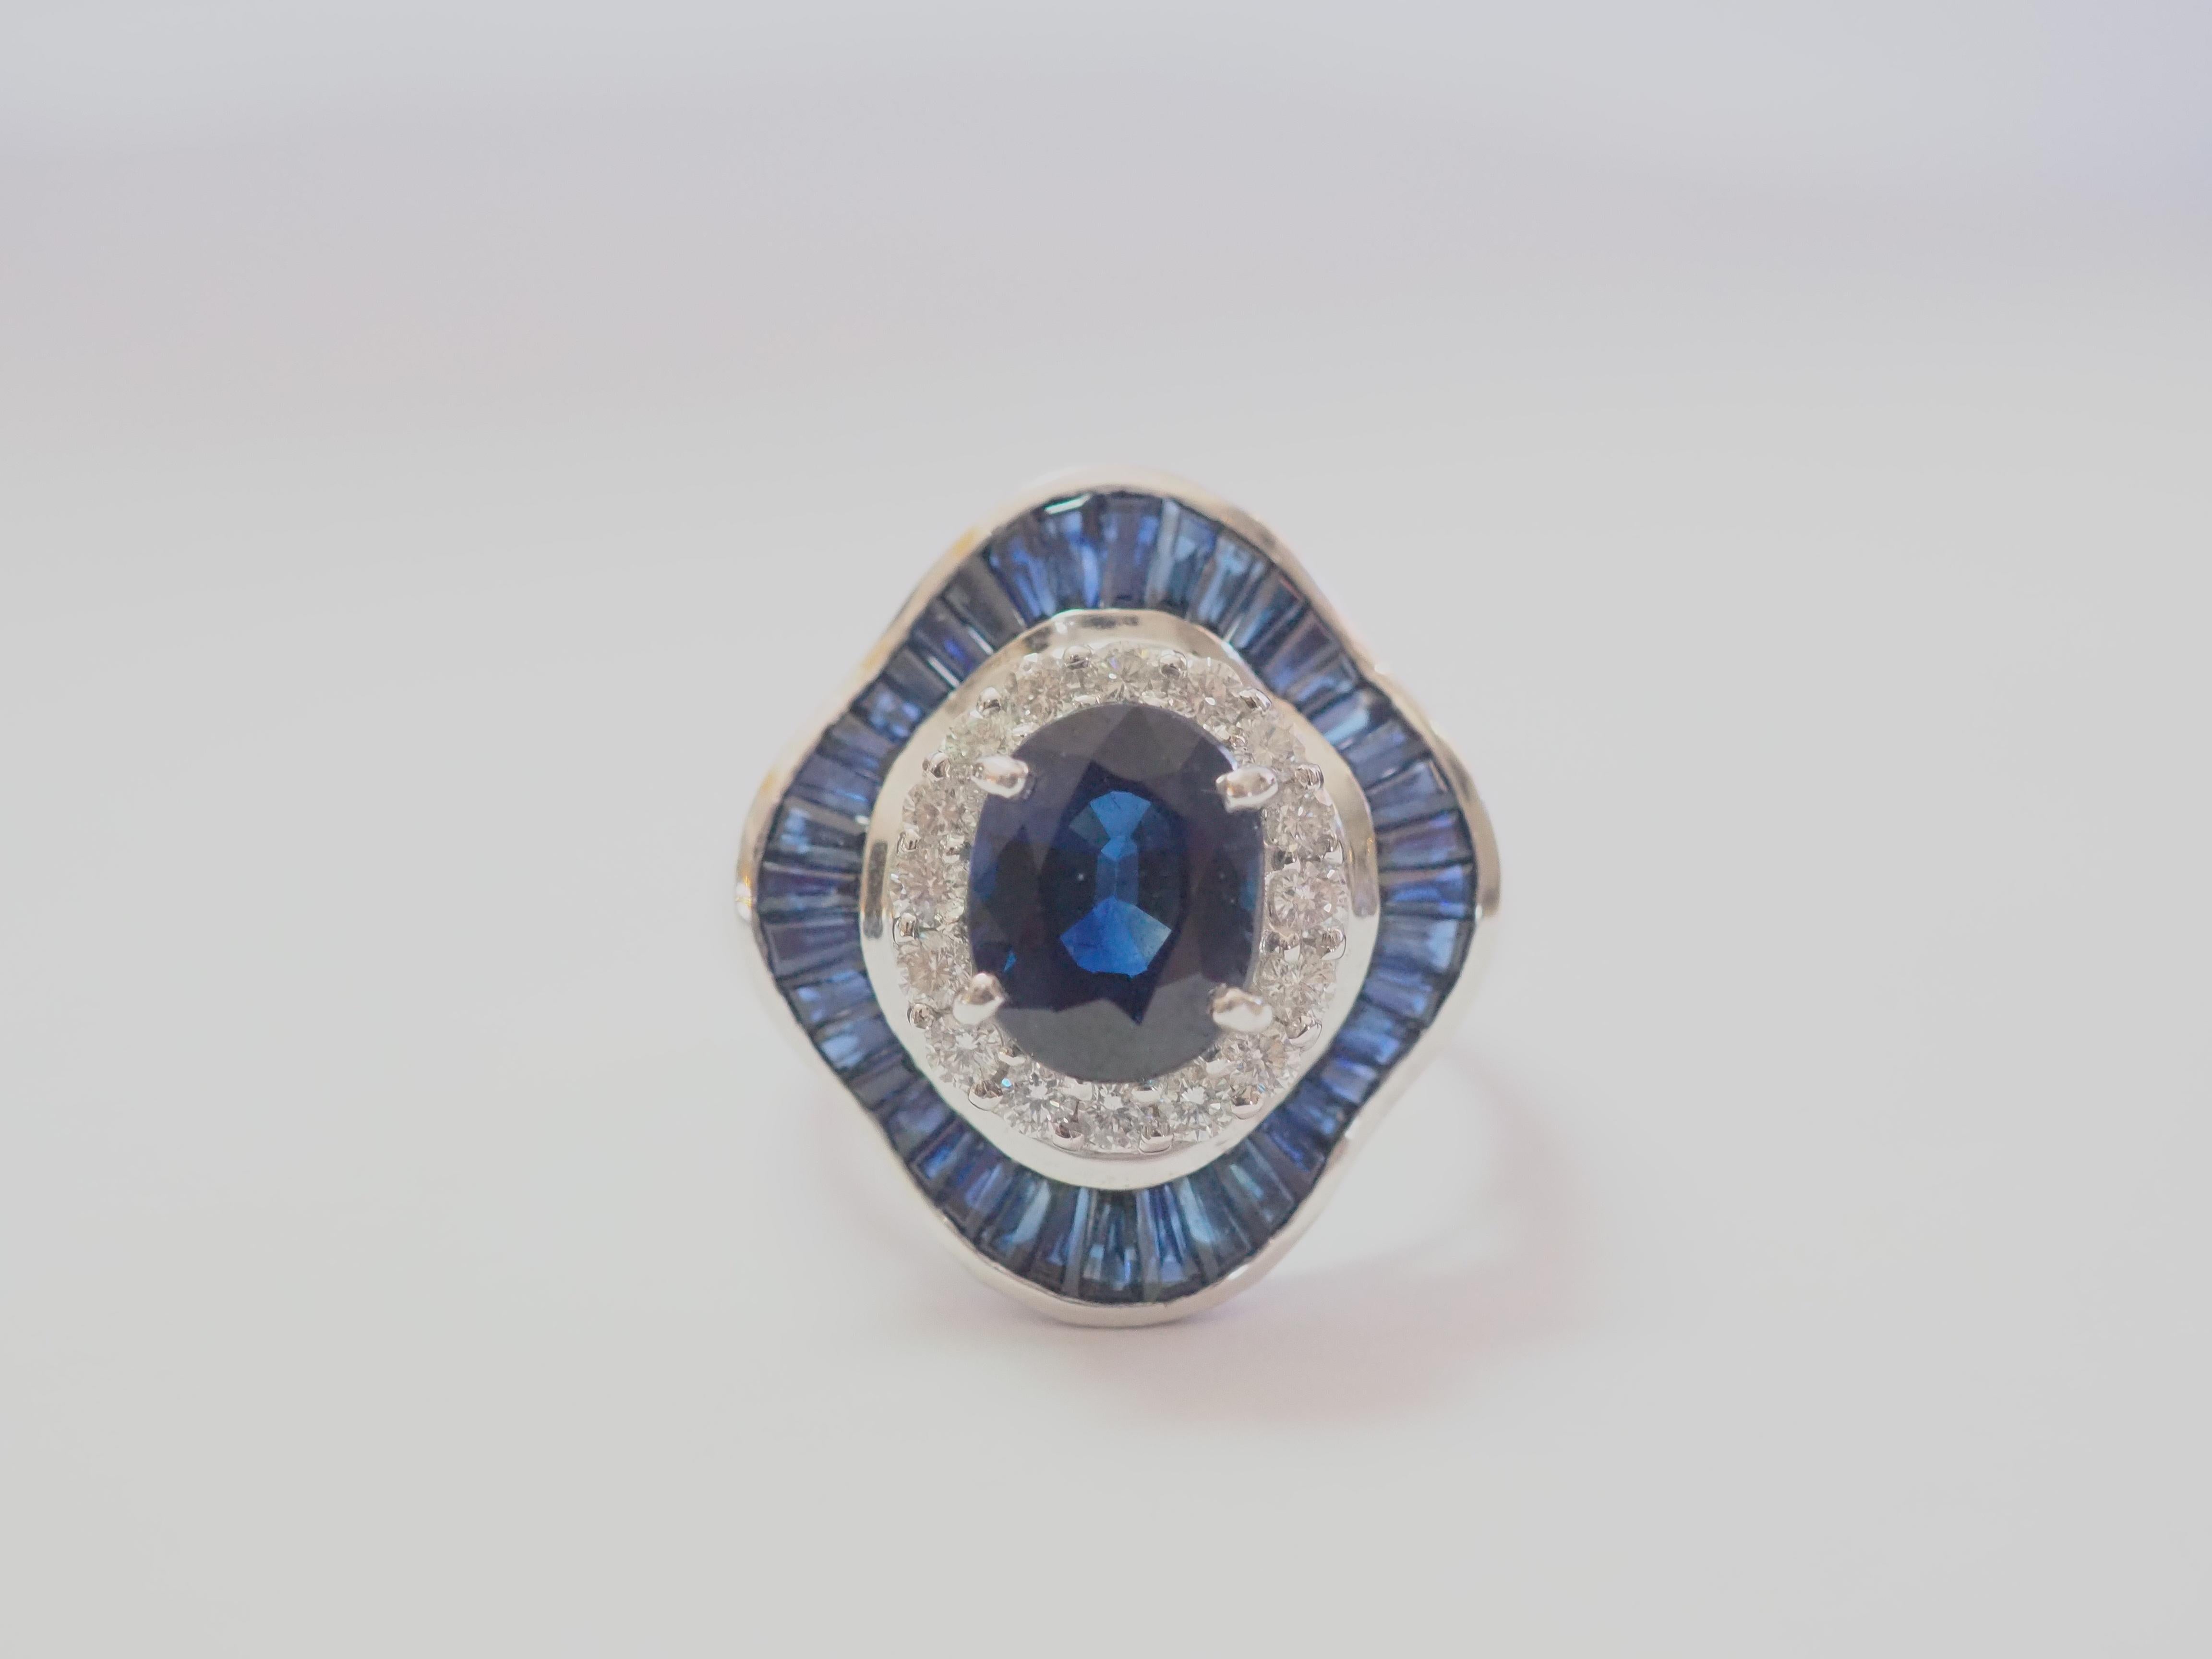 A stunning dark tone Thai royal blue sapphire ring. The oval blue sapphire has a good saturation of blue and with no visible eye inclusions. The diamonds here are brilliant and of very good quality, clear and colorless. The surrounding caliber-cut